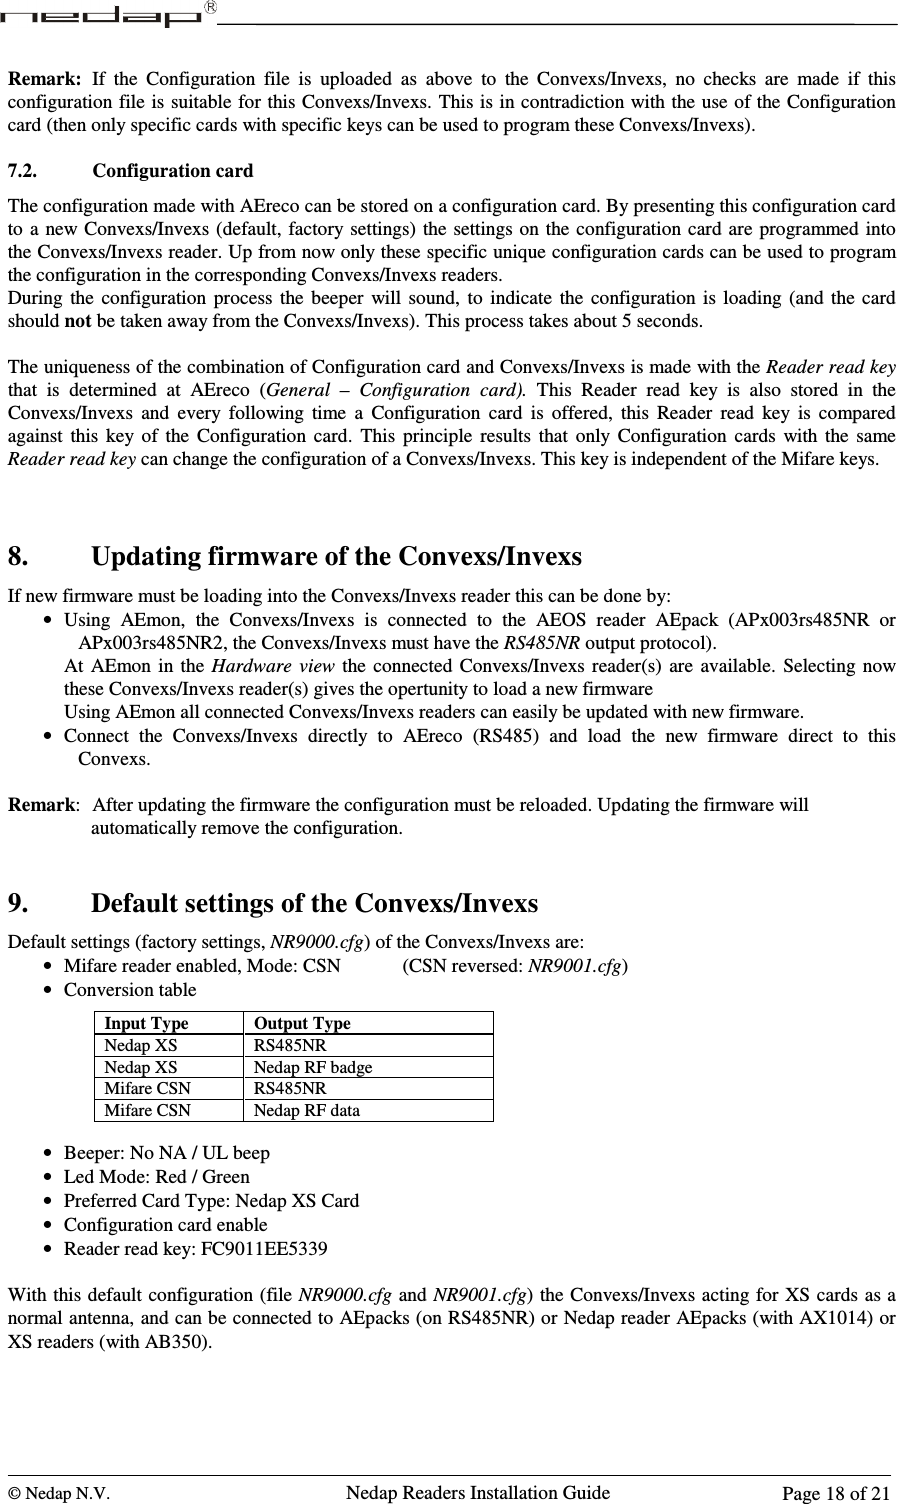  © Nedap N.V.                   Nedap Readers Installation Guide      Page 18 of 21 Remark:  If  the  Configuration  file  is  uploaded  as  above  to  the  Convexs/Invexs,  no  checks  are  made  if  this configuration file is suitable for this Convexs/Invexs. This is in contradiction with the use of the Configuration card (then only specific cards with specific keys can be used to program these Convexs/Invexs).  7.2. Configuration card The configuration made with AEreco can be stored on a configuration card. By presenting this configuration card to  a new Convexs/Invexs (default,  factory settings) the settings on  the configuration card are programmed into the Convexs/Invexs reader. Up from now only these specific unique configuration cards can be used to program the configuration in the corresponding Convexs/Invexs readers. During  the  configuration  process  the  beeper  will  sound,  to  indicate  the  configuration  is  loading (and the card should not be taken away from the Convexs/Invexs). This process takes about 5 seconds.  The uniqueness of the combination of Configuration card and Convexs/Invexs is made with the Reader read key that  is  determined  at  AEreco  (General  –  Configuration  card).  This  Reader  read  key  is  also  stored  in  the Convexs/Invexs  and  every  following  time  a  Configuration  card  is  offered,  this  Reader  read  key  is  compared against  this  key  of  the  Configuration  card.  This  principle  results  that  only  Configuration  cards  with  the  same Reader read key can change the configuration of a Convexs/Invexs. This key is independent of the Mifare keys.    8. Updating firmware of the Convexs/Invexs If new firmware must be loading into the Convexs/Invexs reader this can be done by: • Using  AEmon,  the  Convexs/Invexs  is  connected  to  the  AEOS  reader  AEpack  (APx003rs485NR  or APx003rs485NR2, the Convexs/Invexs must have the RS485NR output protocol). At  AEmon in the  Hardware  view  the connected  Convexs/Invexs reader(s)  are  available.  Selecting now these Convexs/Invexs reader(s) gives the opertunity to load a new firmware Using AEmon all connected Convexs/Invexs readers can easily be updated with new firmware. • Connect  the  Convexs/Invexs  directly  to  AEreco  (RS485)  and  load  the  new  firmware  direct  to  this Convexs.  Remark:  After updating the firmware the configuration must be reloaded. Updating the firmware will  automatically remove the configuration.   9. Default settings of the Convexs/Invexs Default settings (factory settings, NR9000.cfg) of the Convexs/Invexs are: • Mifare reader enabled, Mode: CSN     (CSN reversed: NR9001.cfg) • Conversion table       • Beeper: No NA / UL beep • Led Mode: Red / Green • Preferred Card Type: Nedap XS Card • Configuration card enable • Reader read key: FC9011EE5339  With this default configuration (file NR9000.cfg and NR9001.cfg)  the Convexs/Invexs acting for XS cards as a normal antenna, and can be connected to AEpacks (on RS485NR) or Nedap reader AEpacks (with AX1014) or XS readers (with AB350).  Input Type Output Type Nedap XS  RS485NR Nedap XS  Nedap RF badge Mifare CSN  RS485NR Mifare CSN  Nedap RF data  